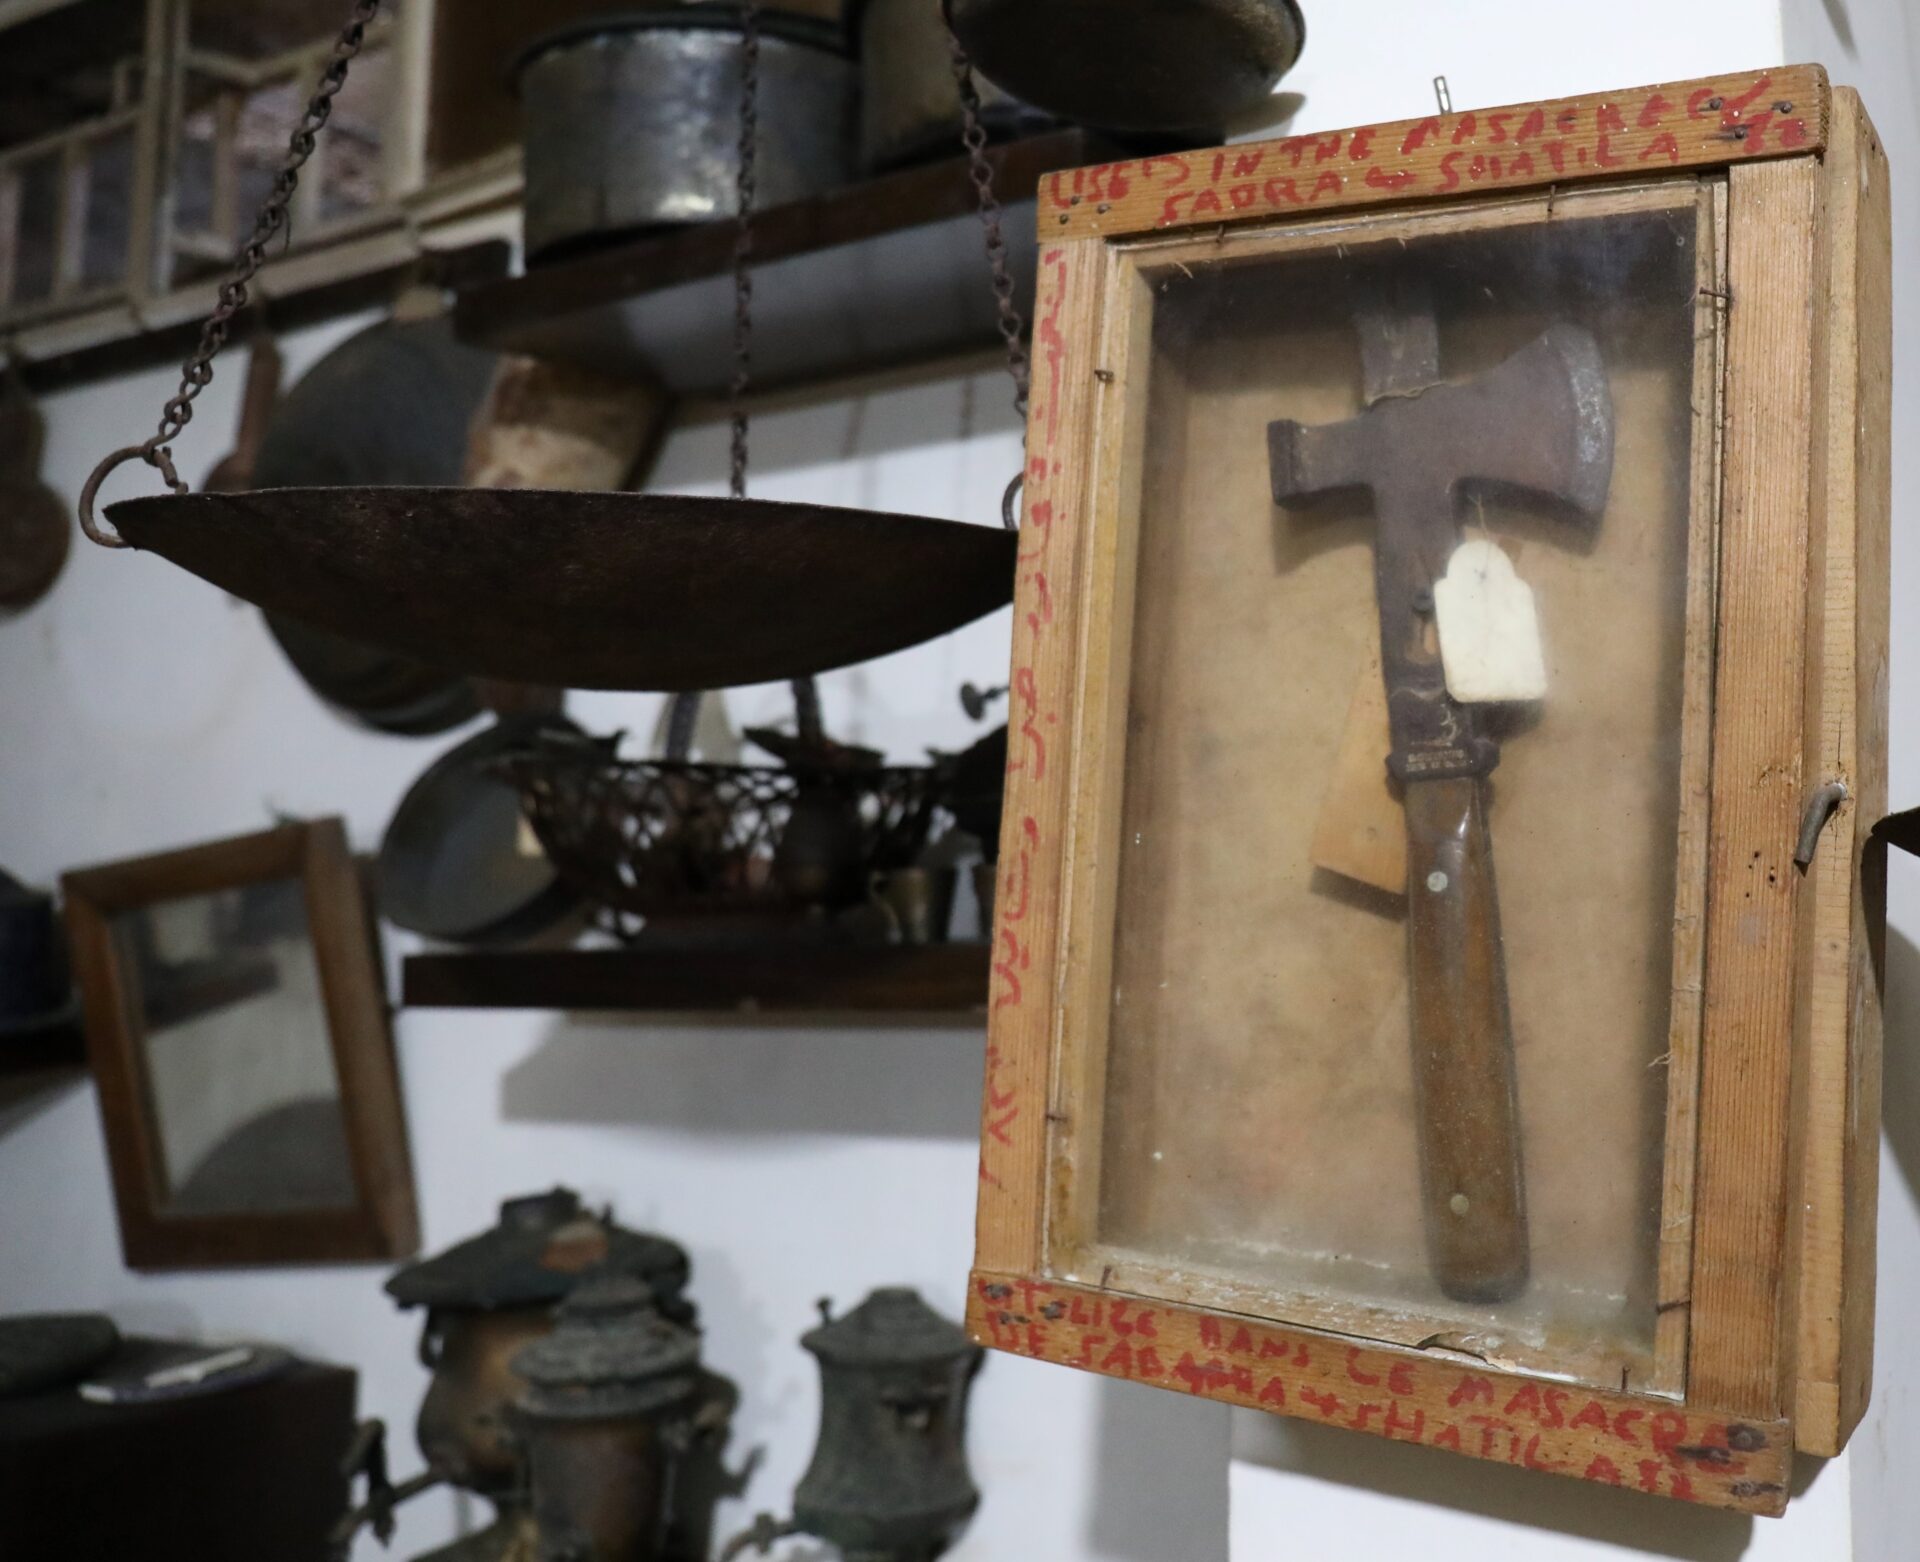 In the Memories Museum, Khatib keeps an ax used during the Sabra and Shatila massacre (William Christou)